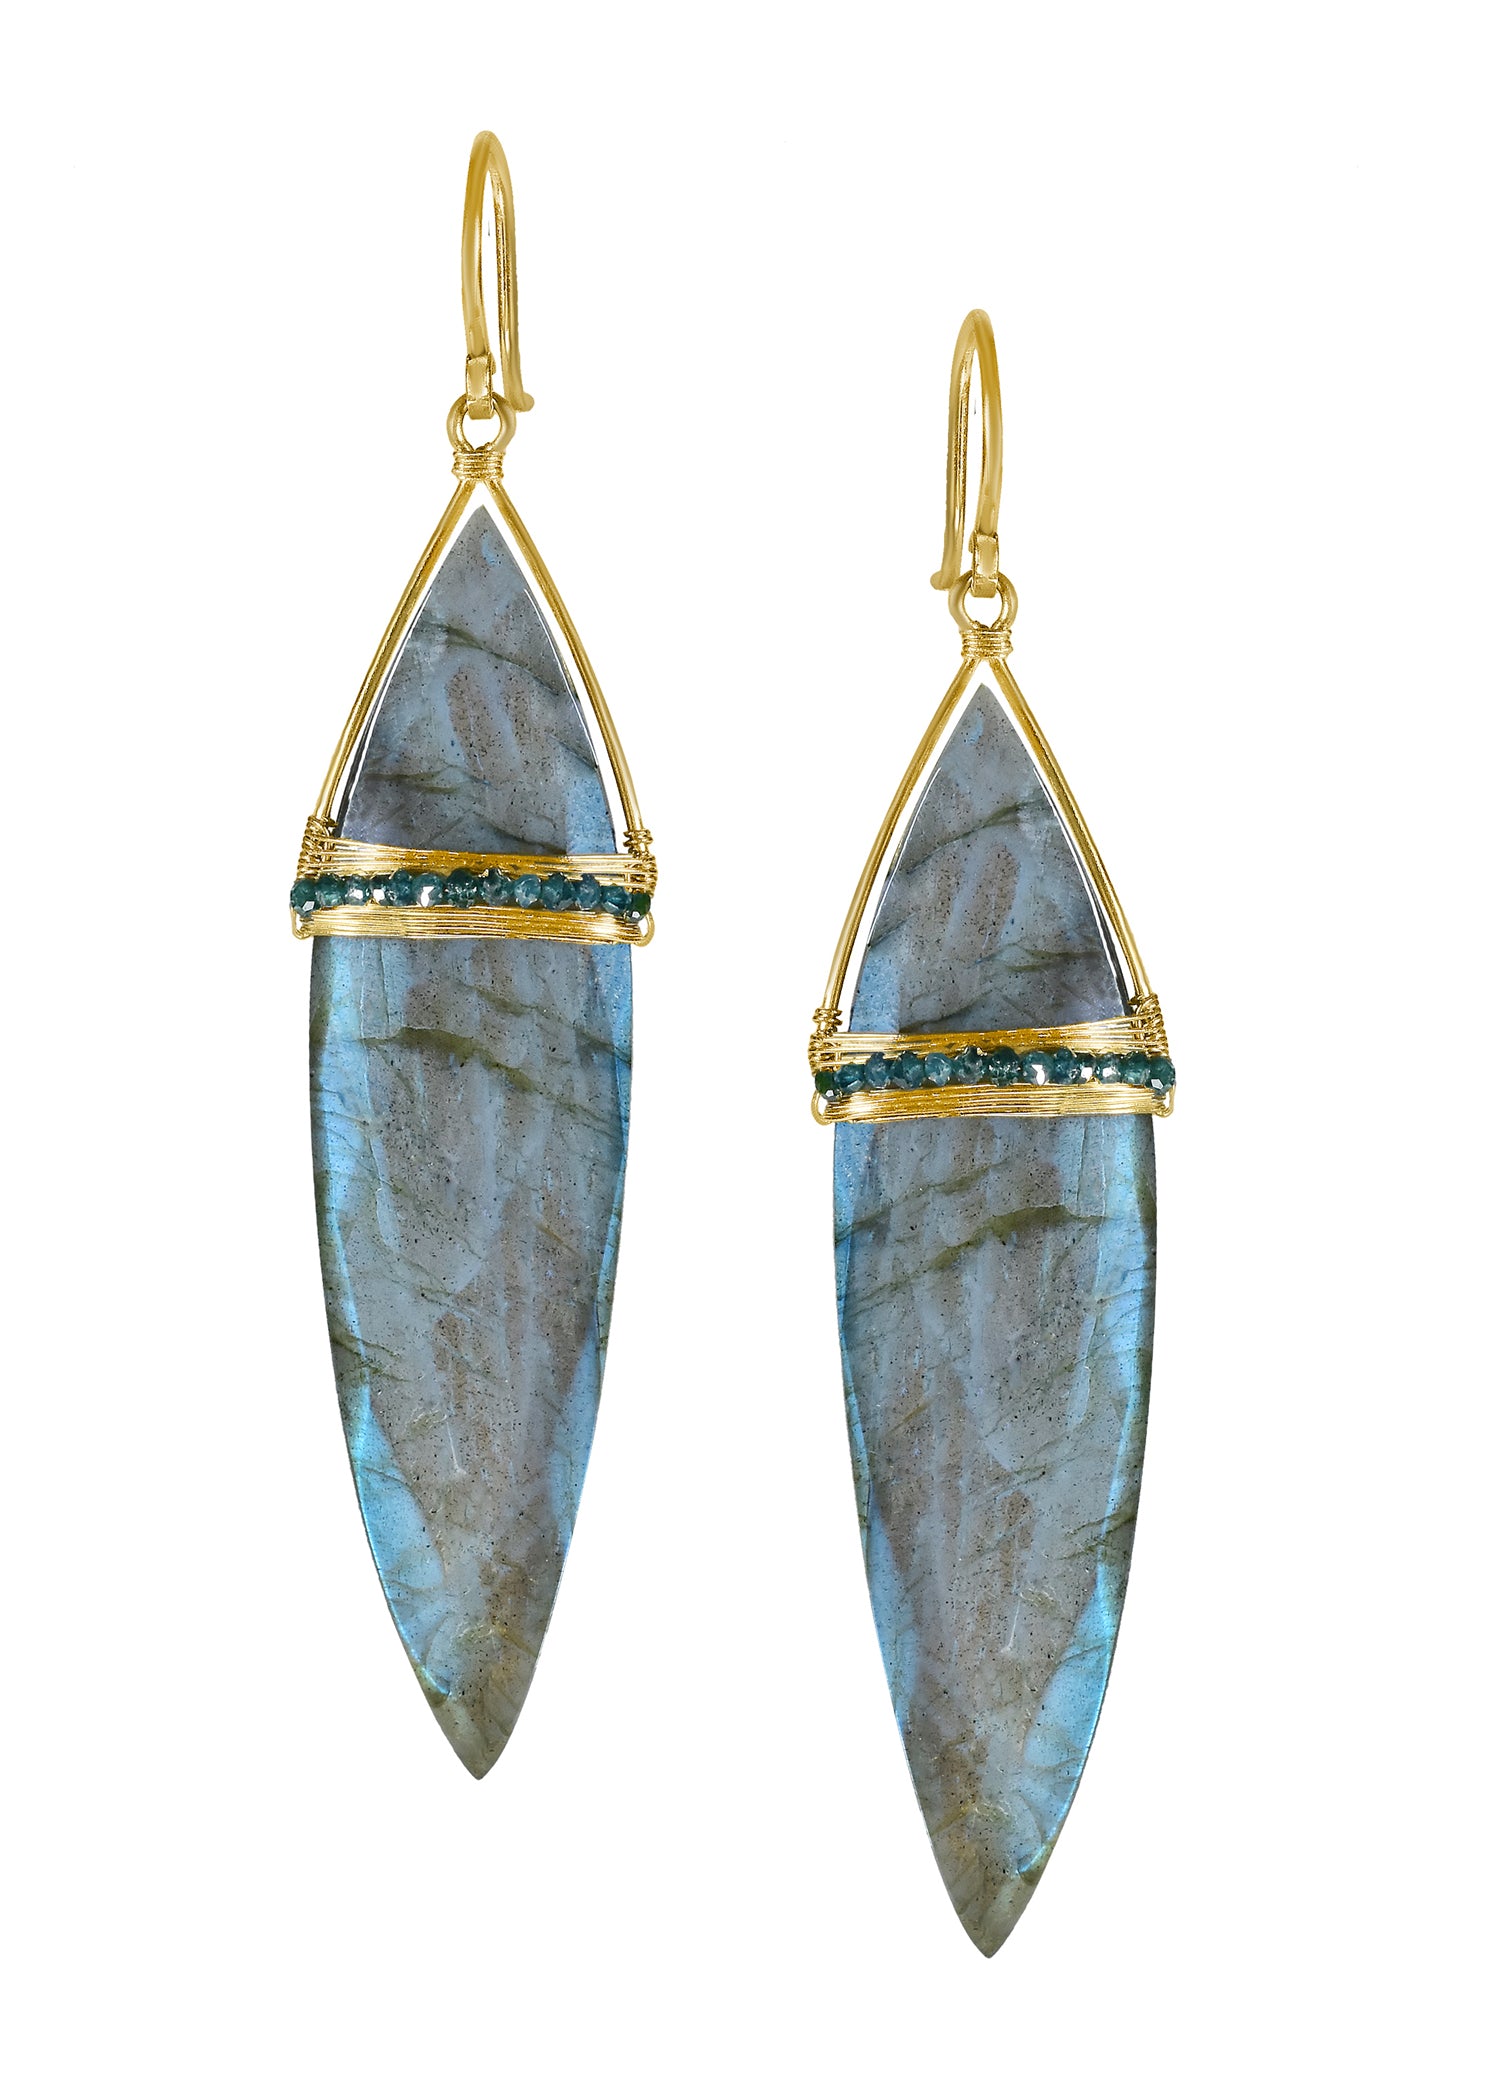 Labradorite 14k gold Earrings measure 2-5/8" in length (including the ear wires) and 5/8" in width at the widest point Handmade in our Los Angeles studio